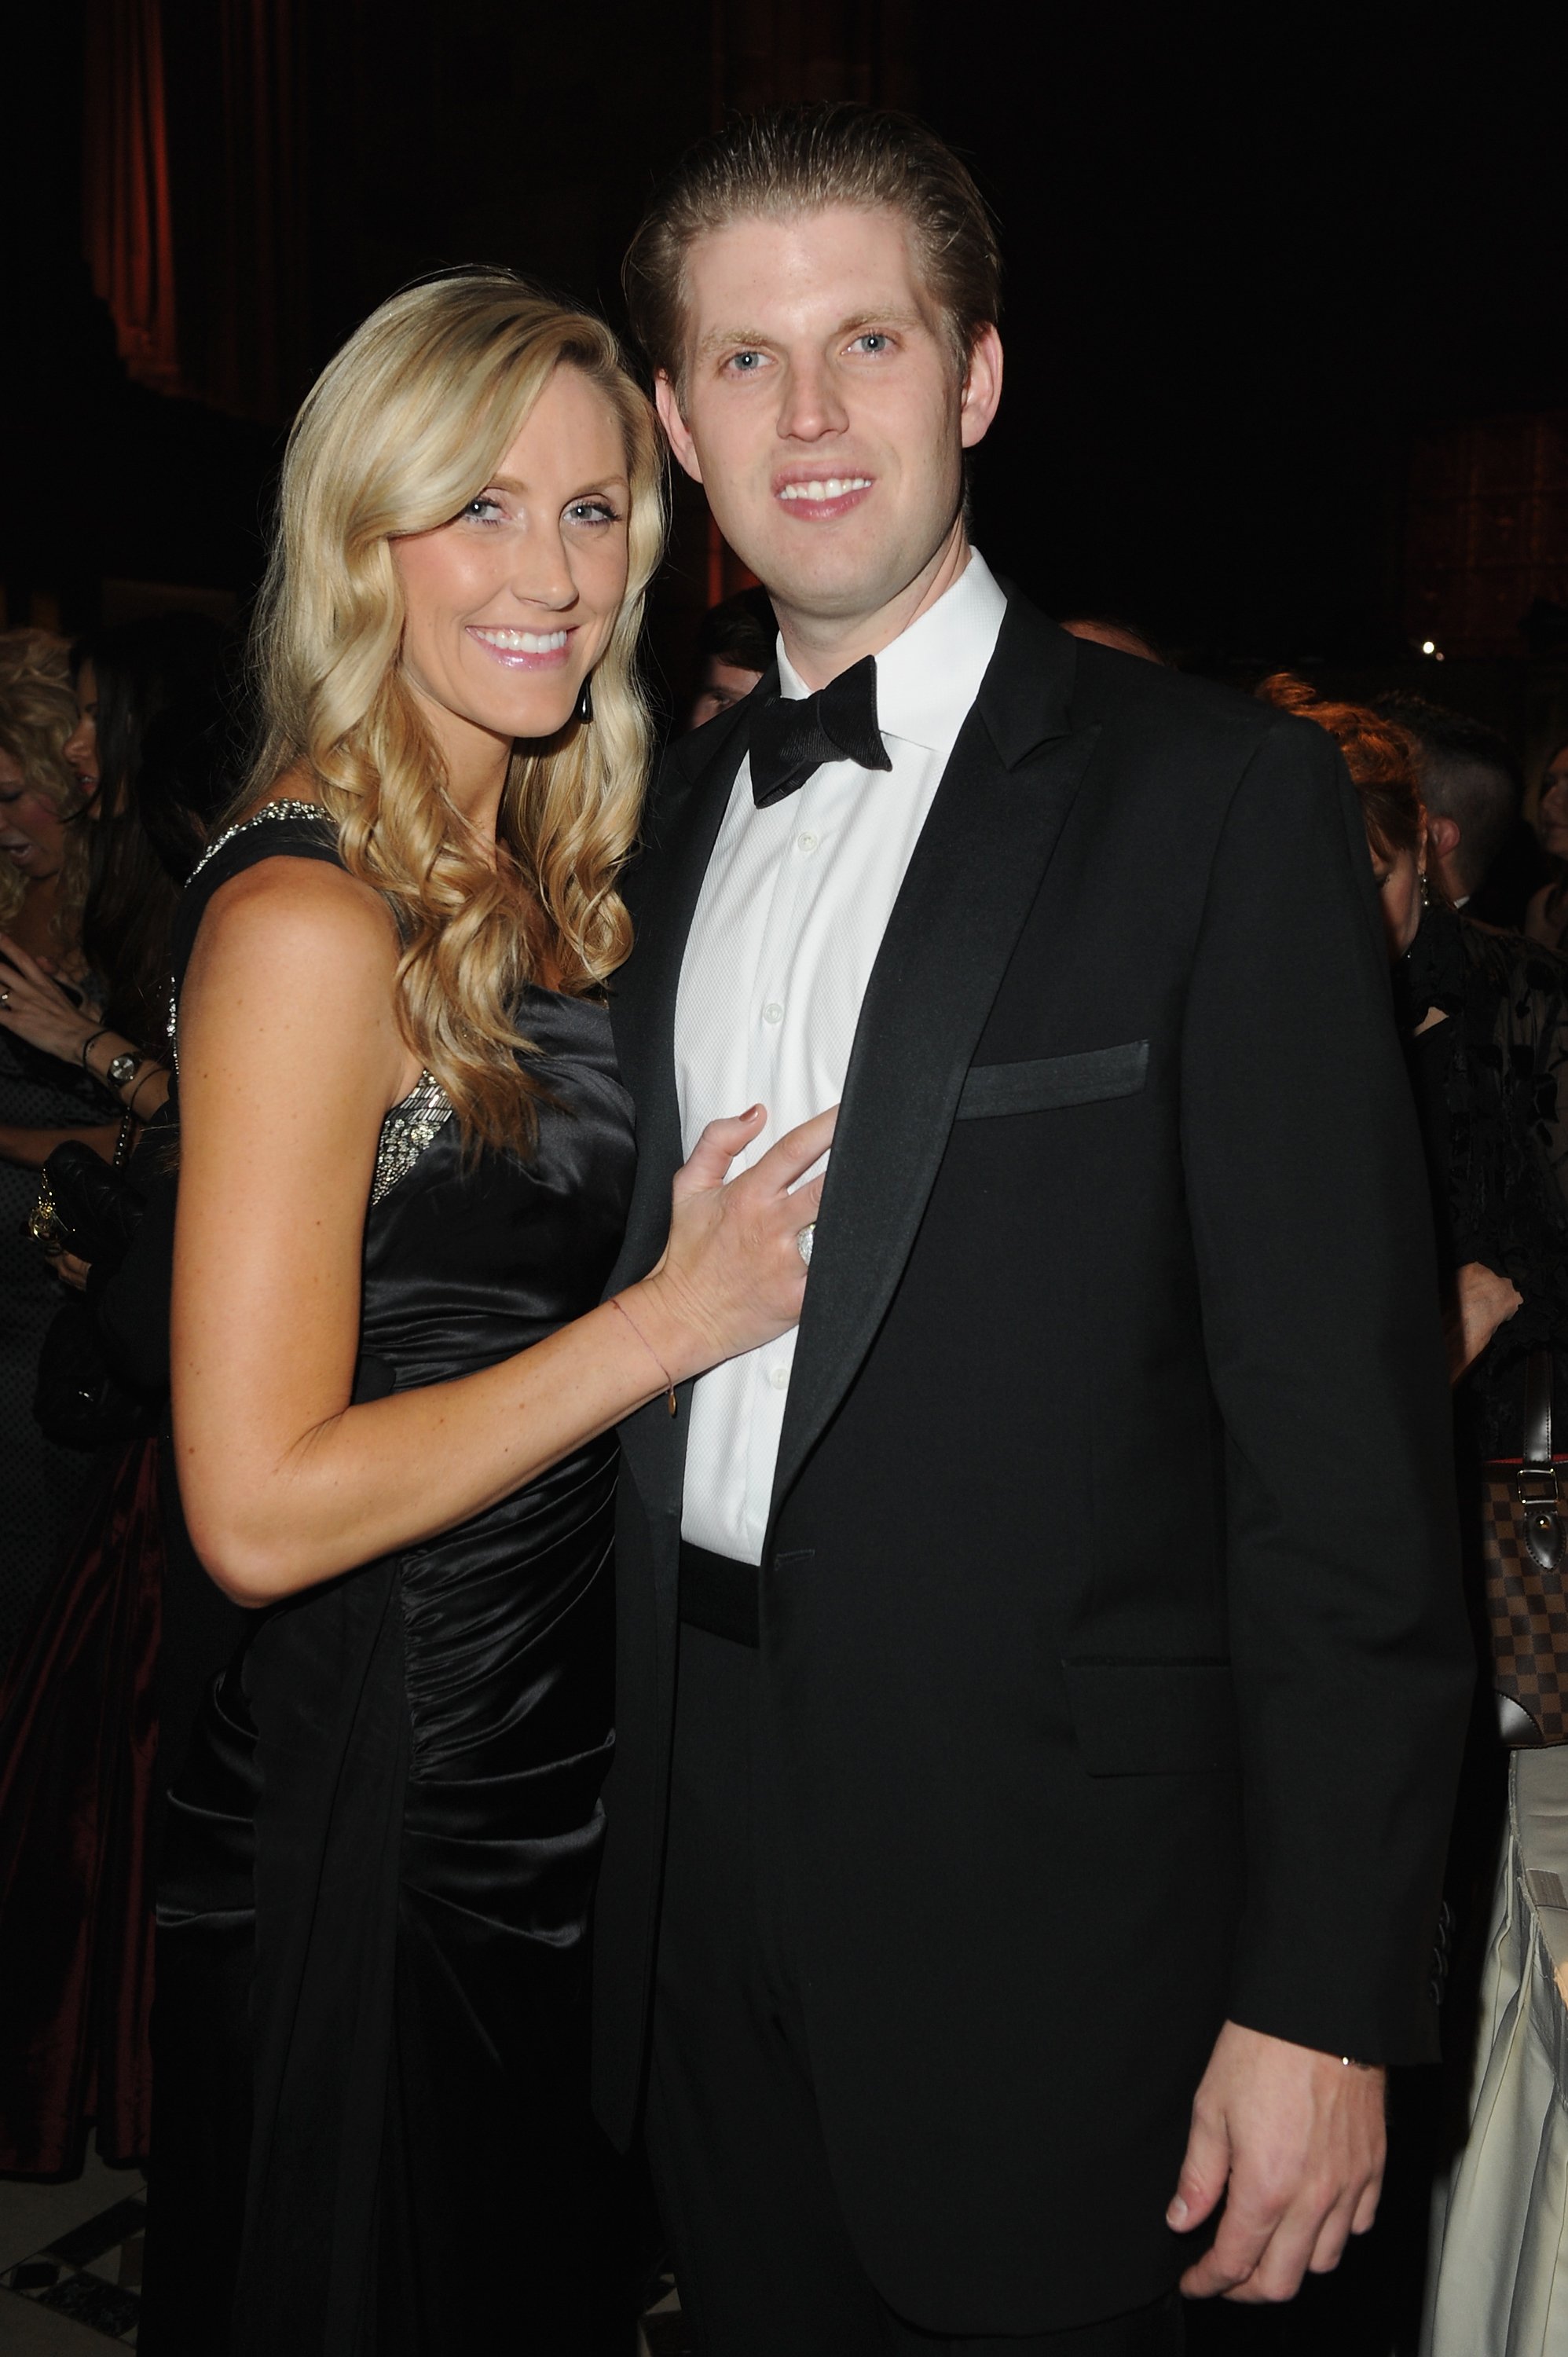 Lara Trump Is President Trump's Daughter-In-Law and Eric Trump's Wife ...